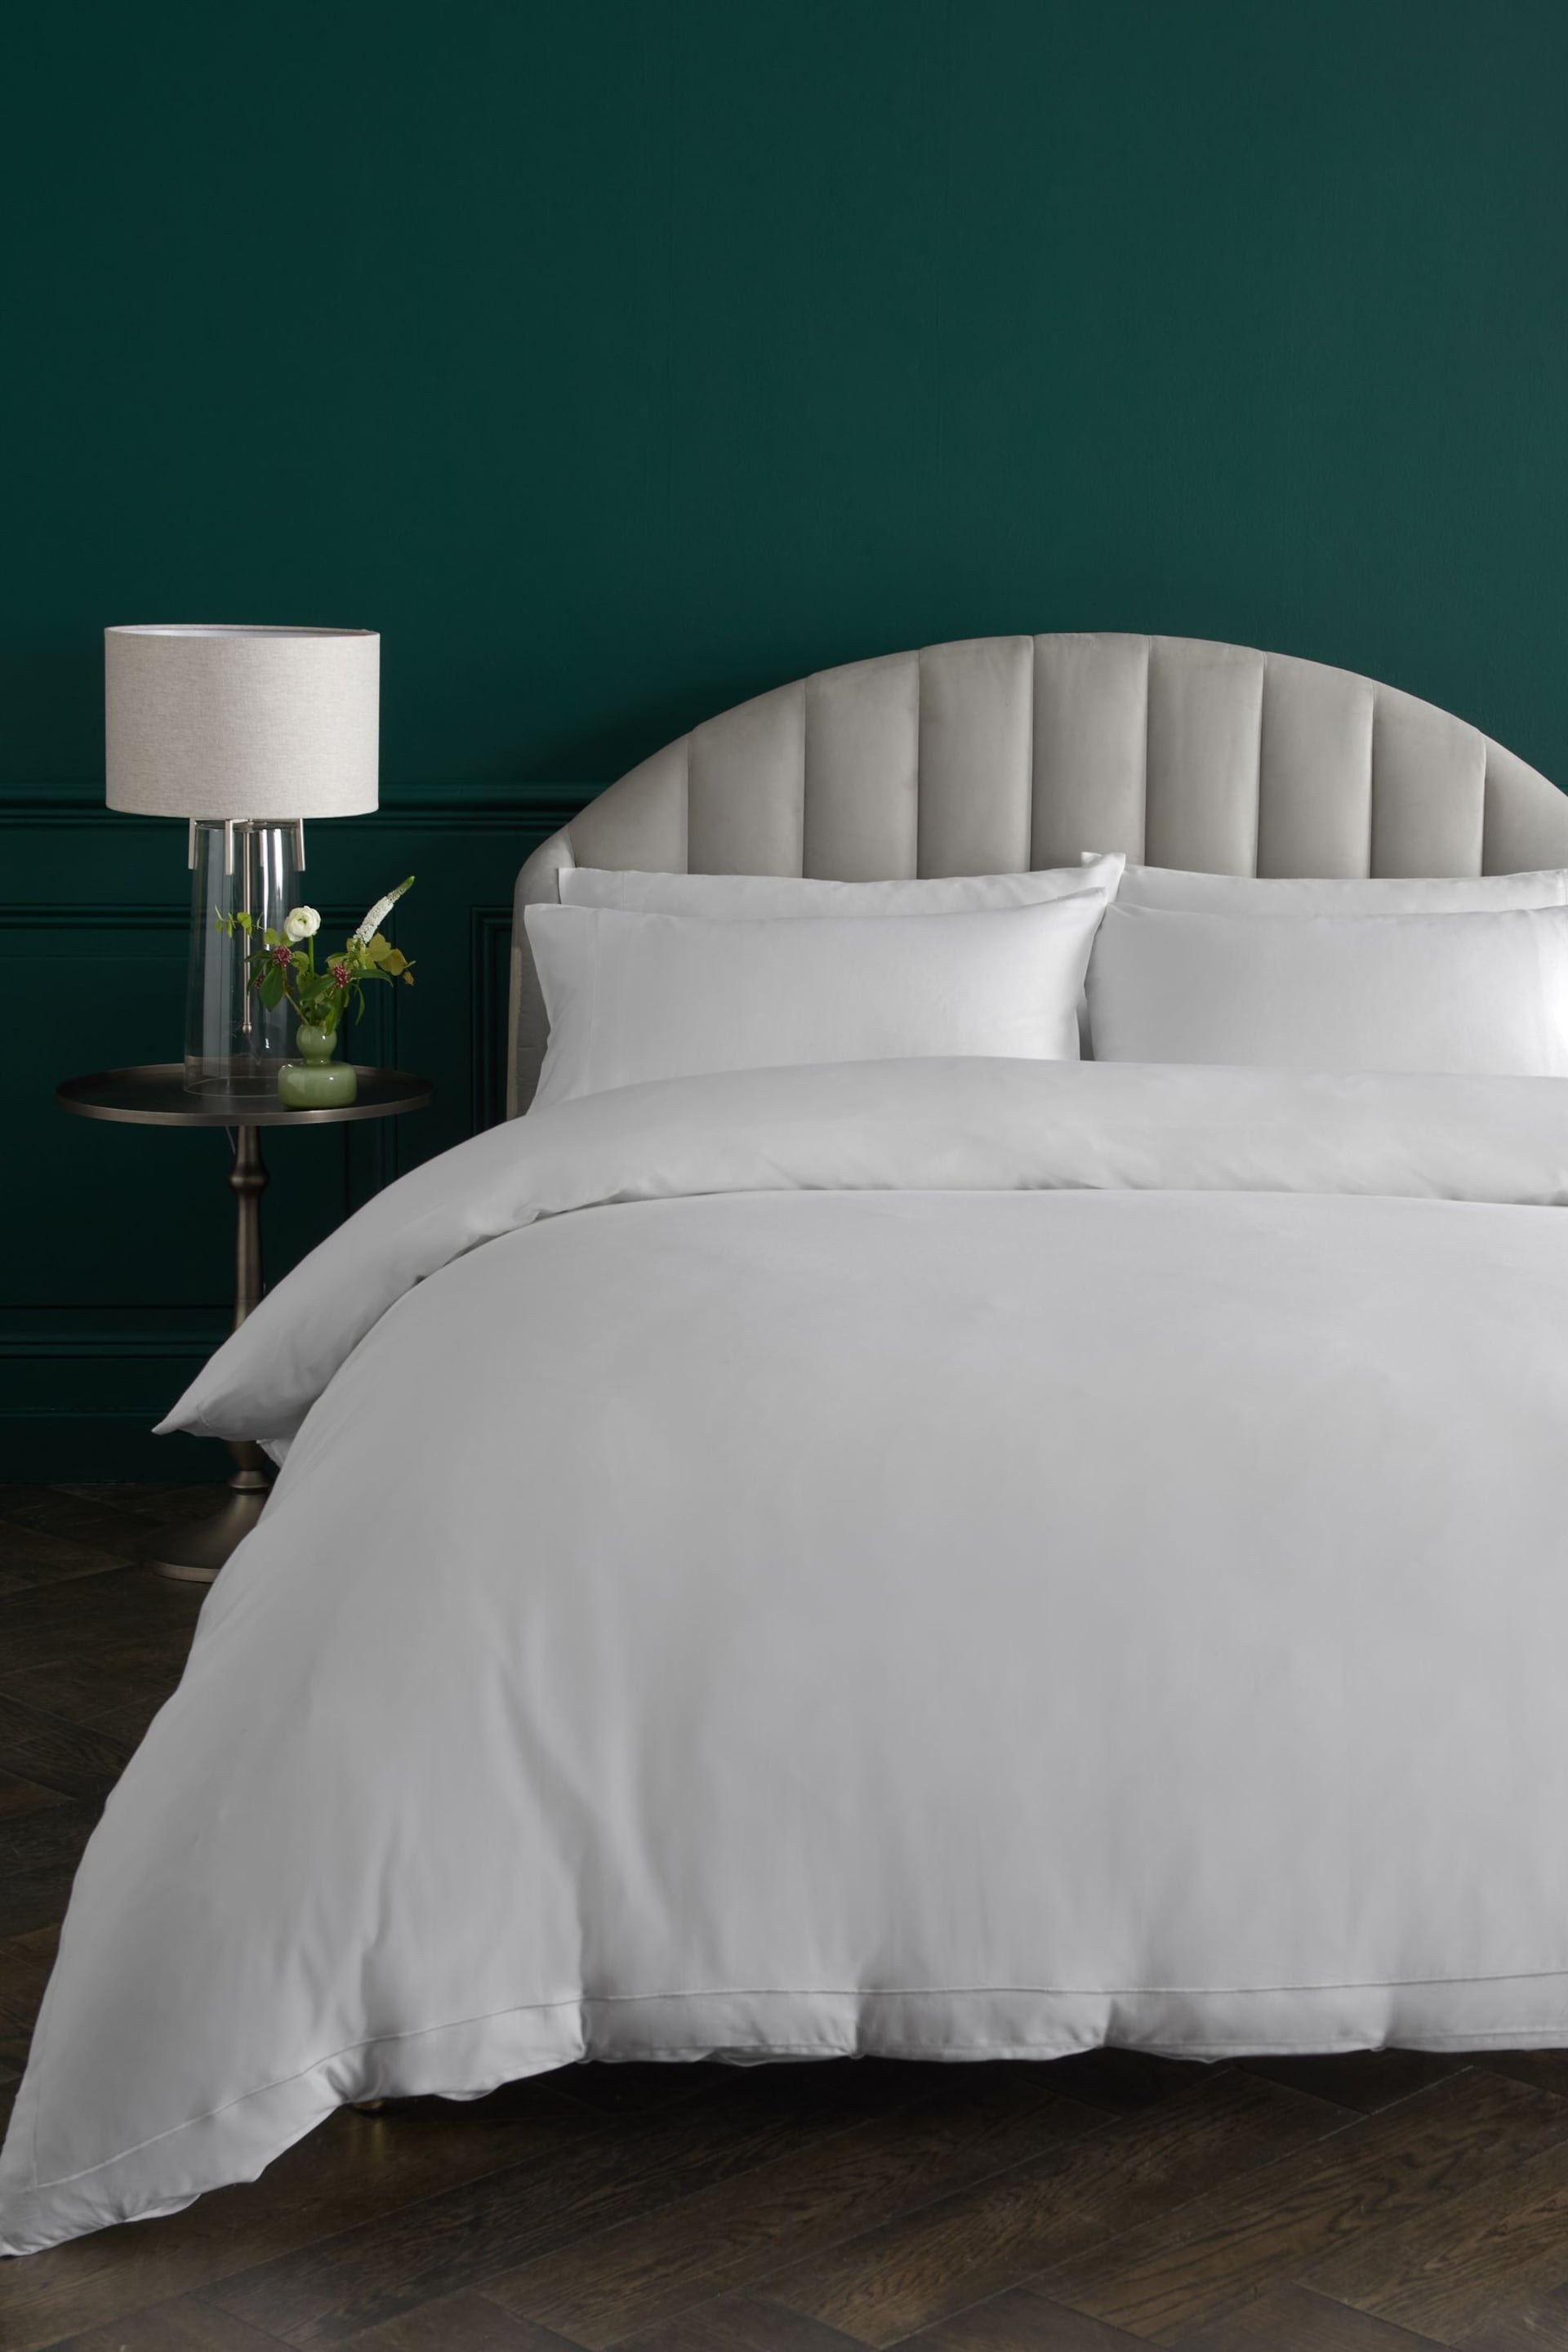 White Collection Luxe 300 Thread Count 100% Cotton Sateen Satin Stitch Duvet Cover And Pillowcase Set - Image 1 of 3